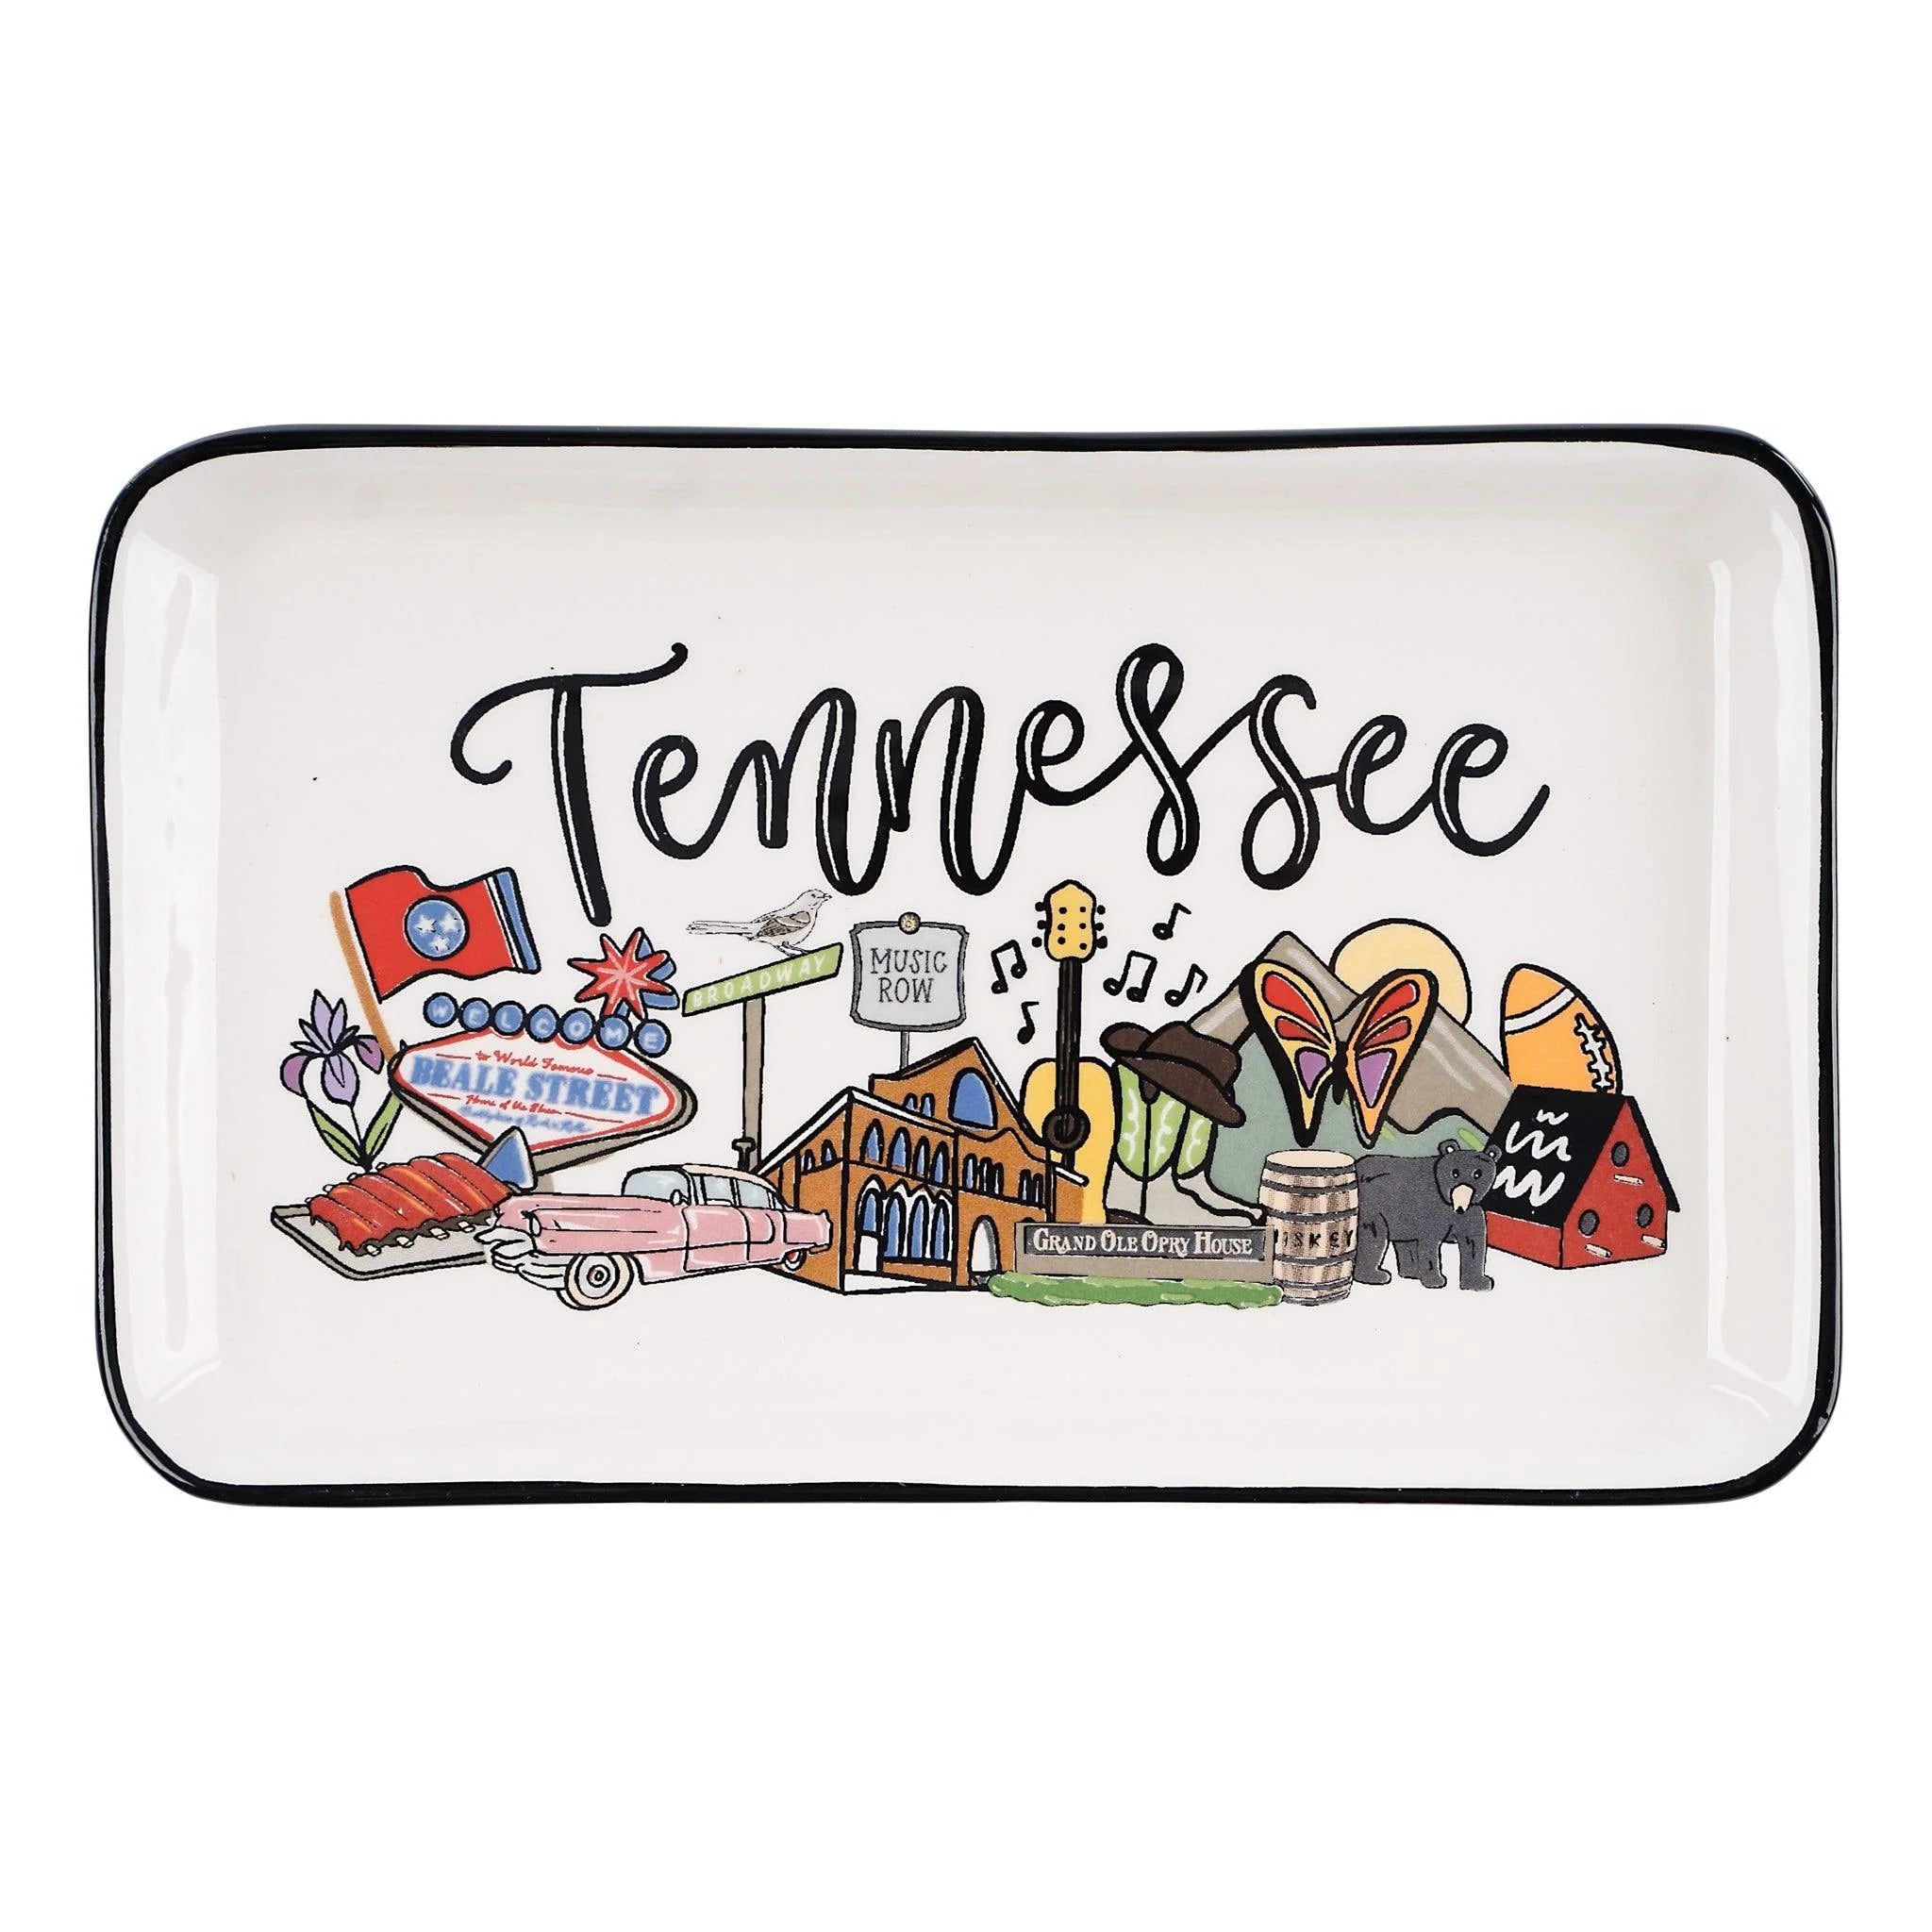 State of Tennessee Trinket Tray